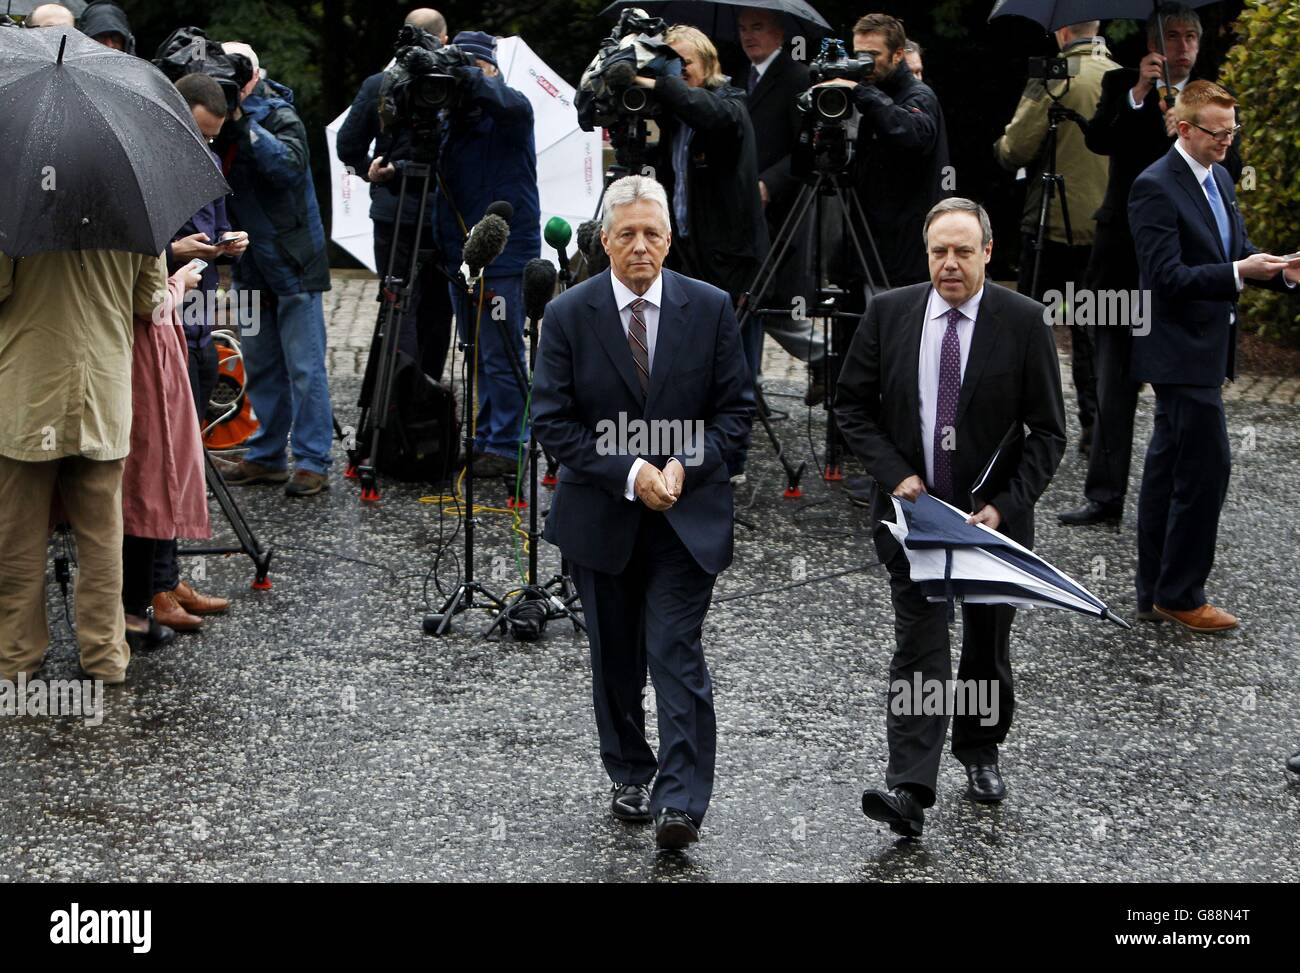 DUP leader Peter Robinson (left) and Nigel Dodds after speaking to the media at Stormont Castle in Belfast. Stock Photo